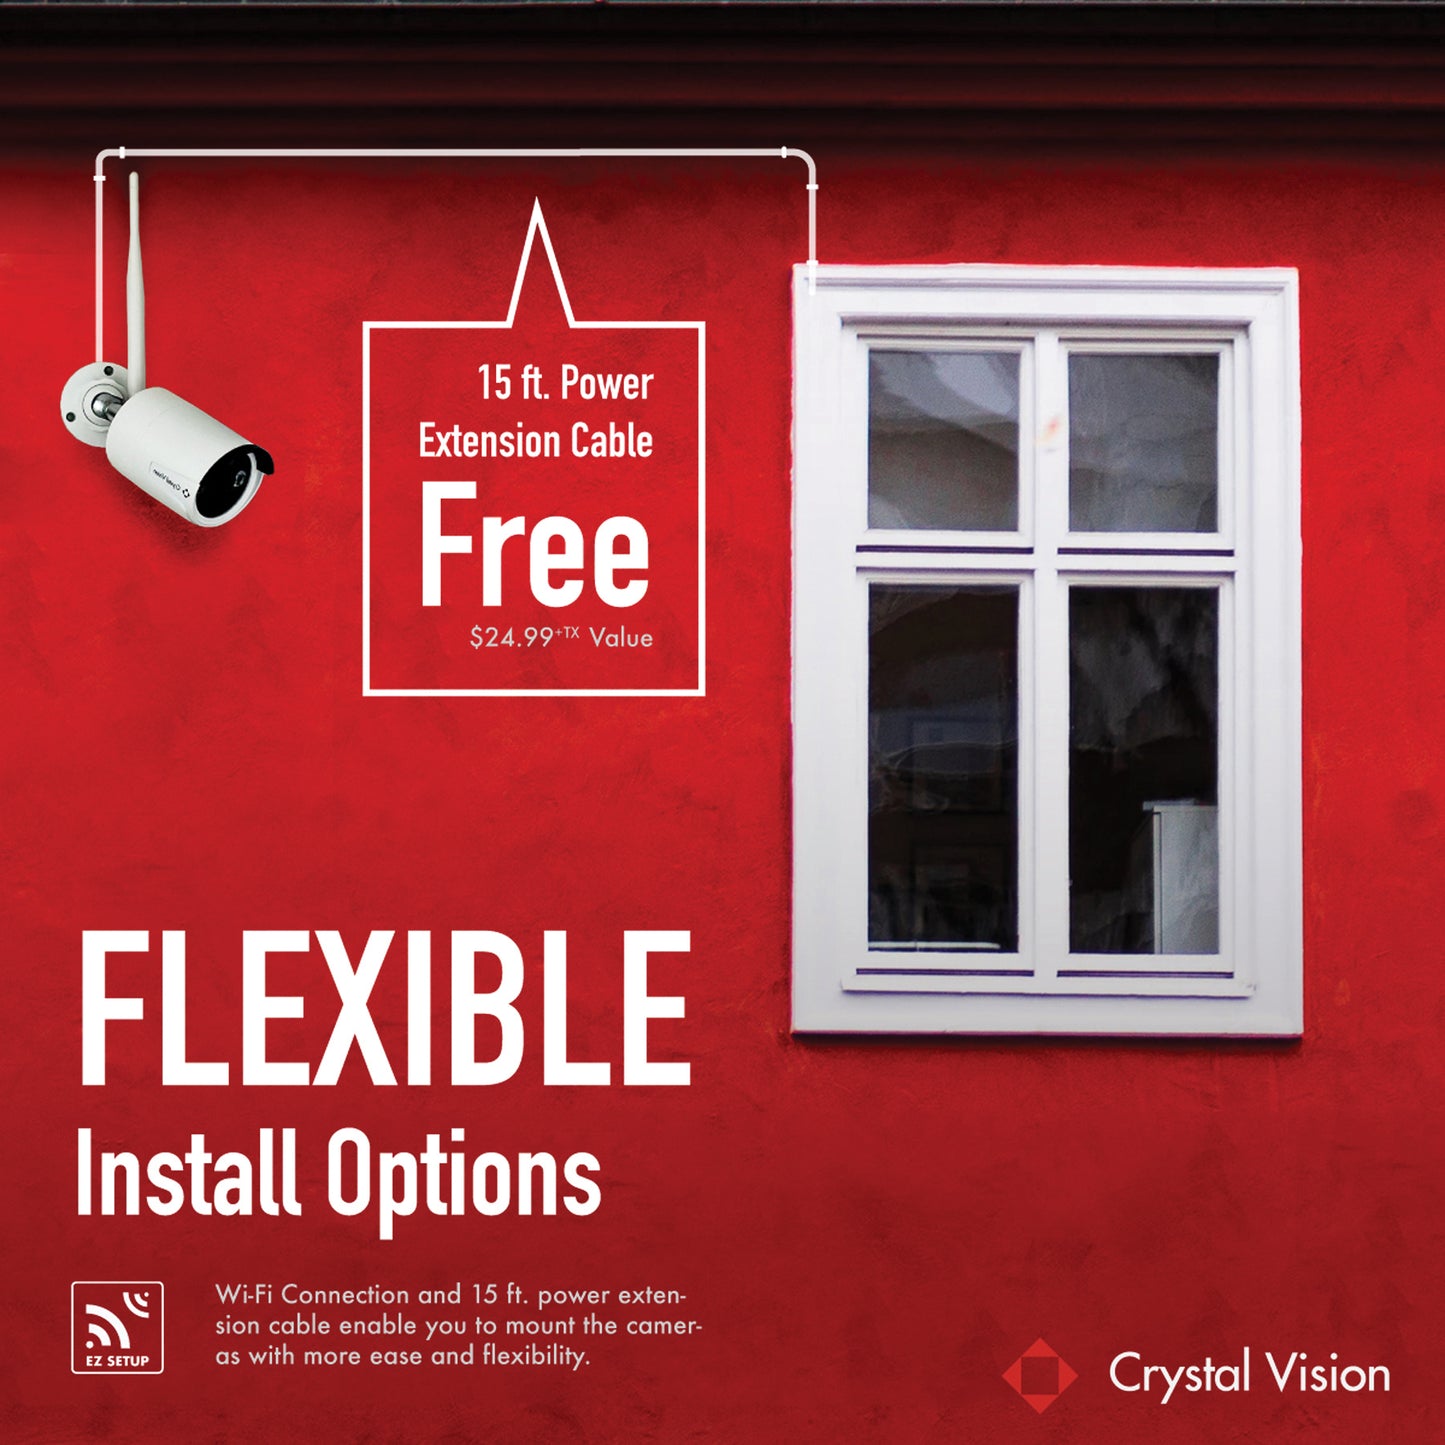 Crystal Vision promotional image featuring a security camera, with an offer for a free 15 ft. power extension cable against a red wall with a white window, and text highlighting _FLEXIBLE Install Options